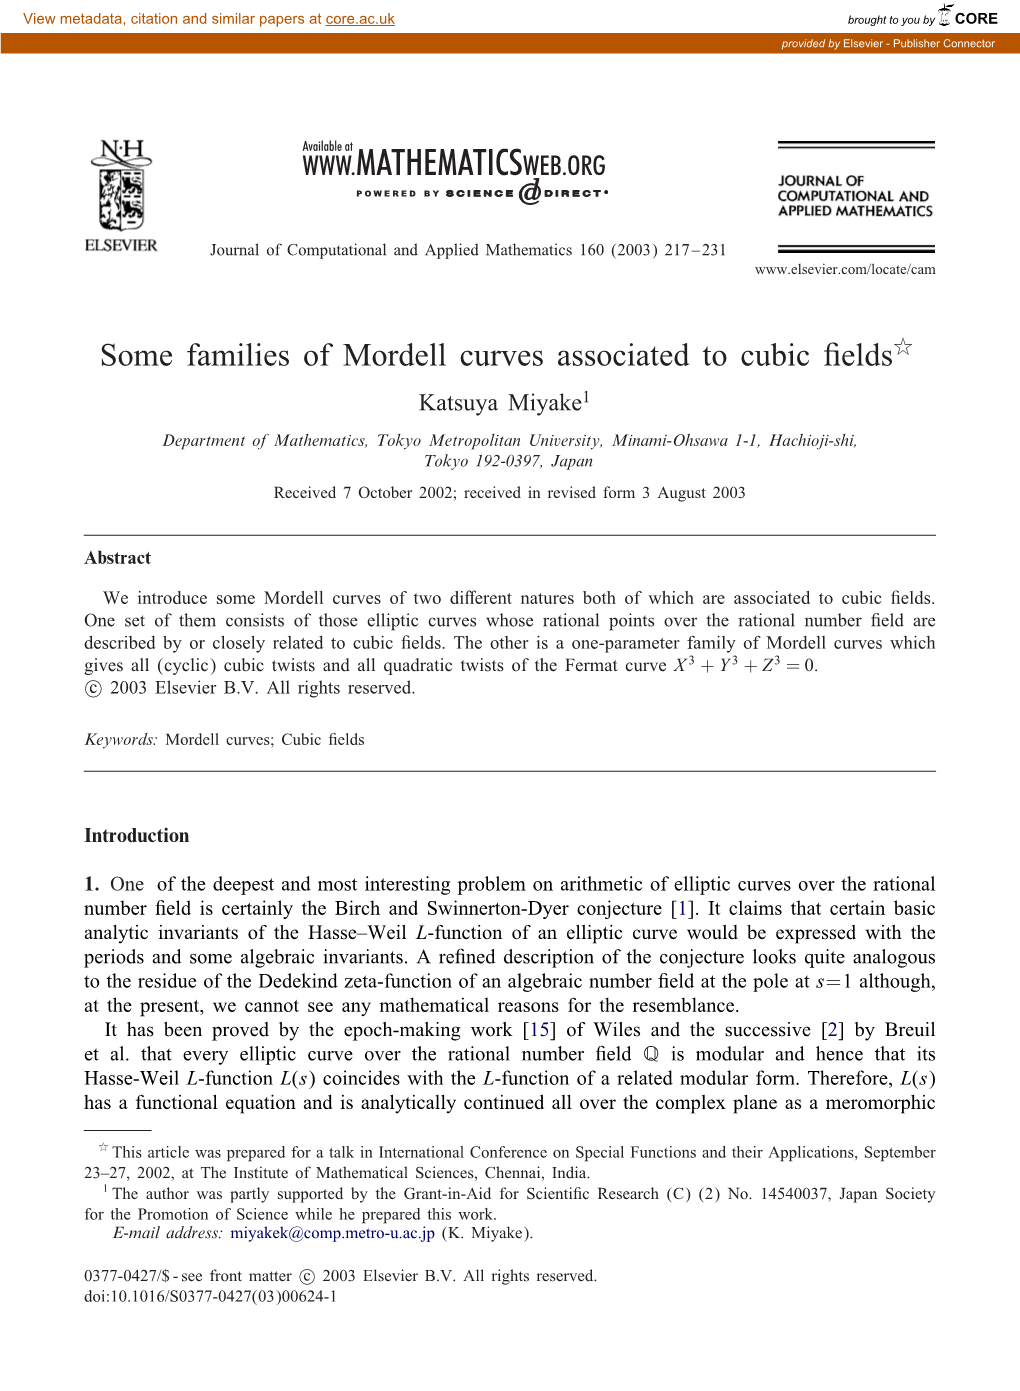 Some Families of Mordell Curves Associated to Cubic Fields